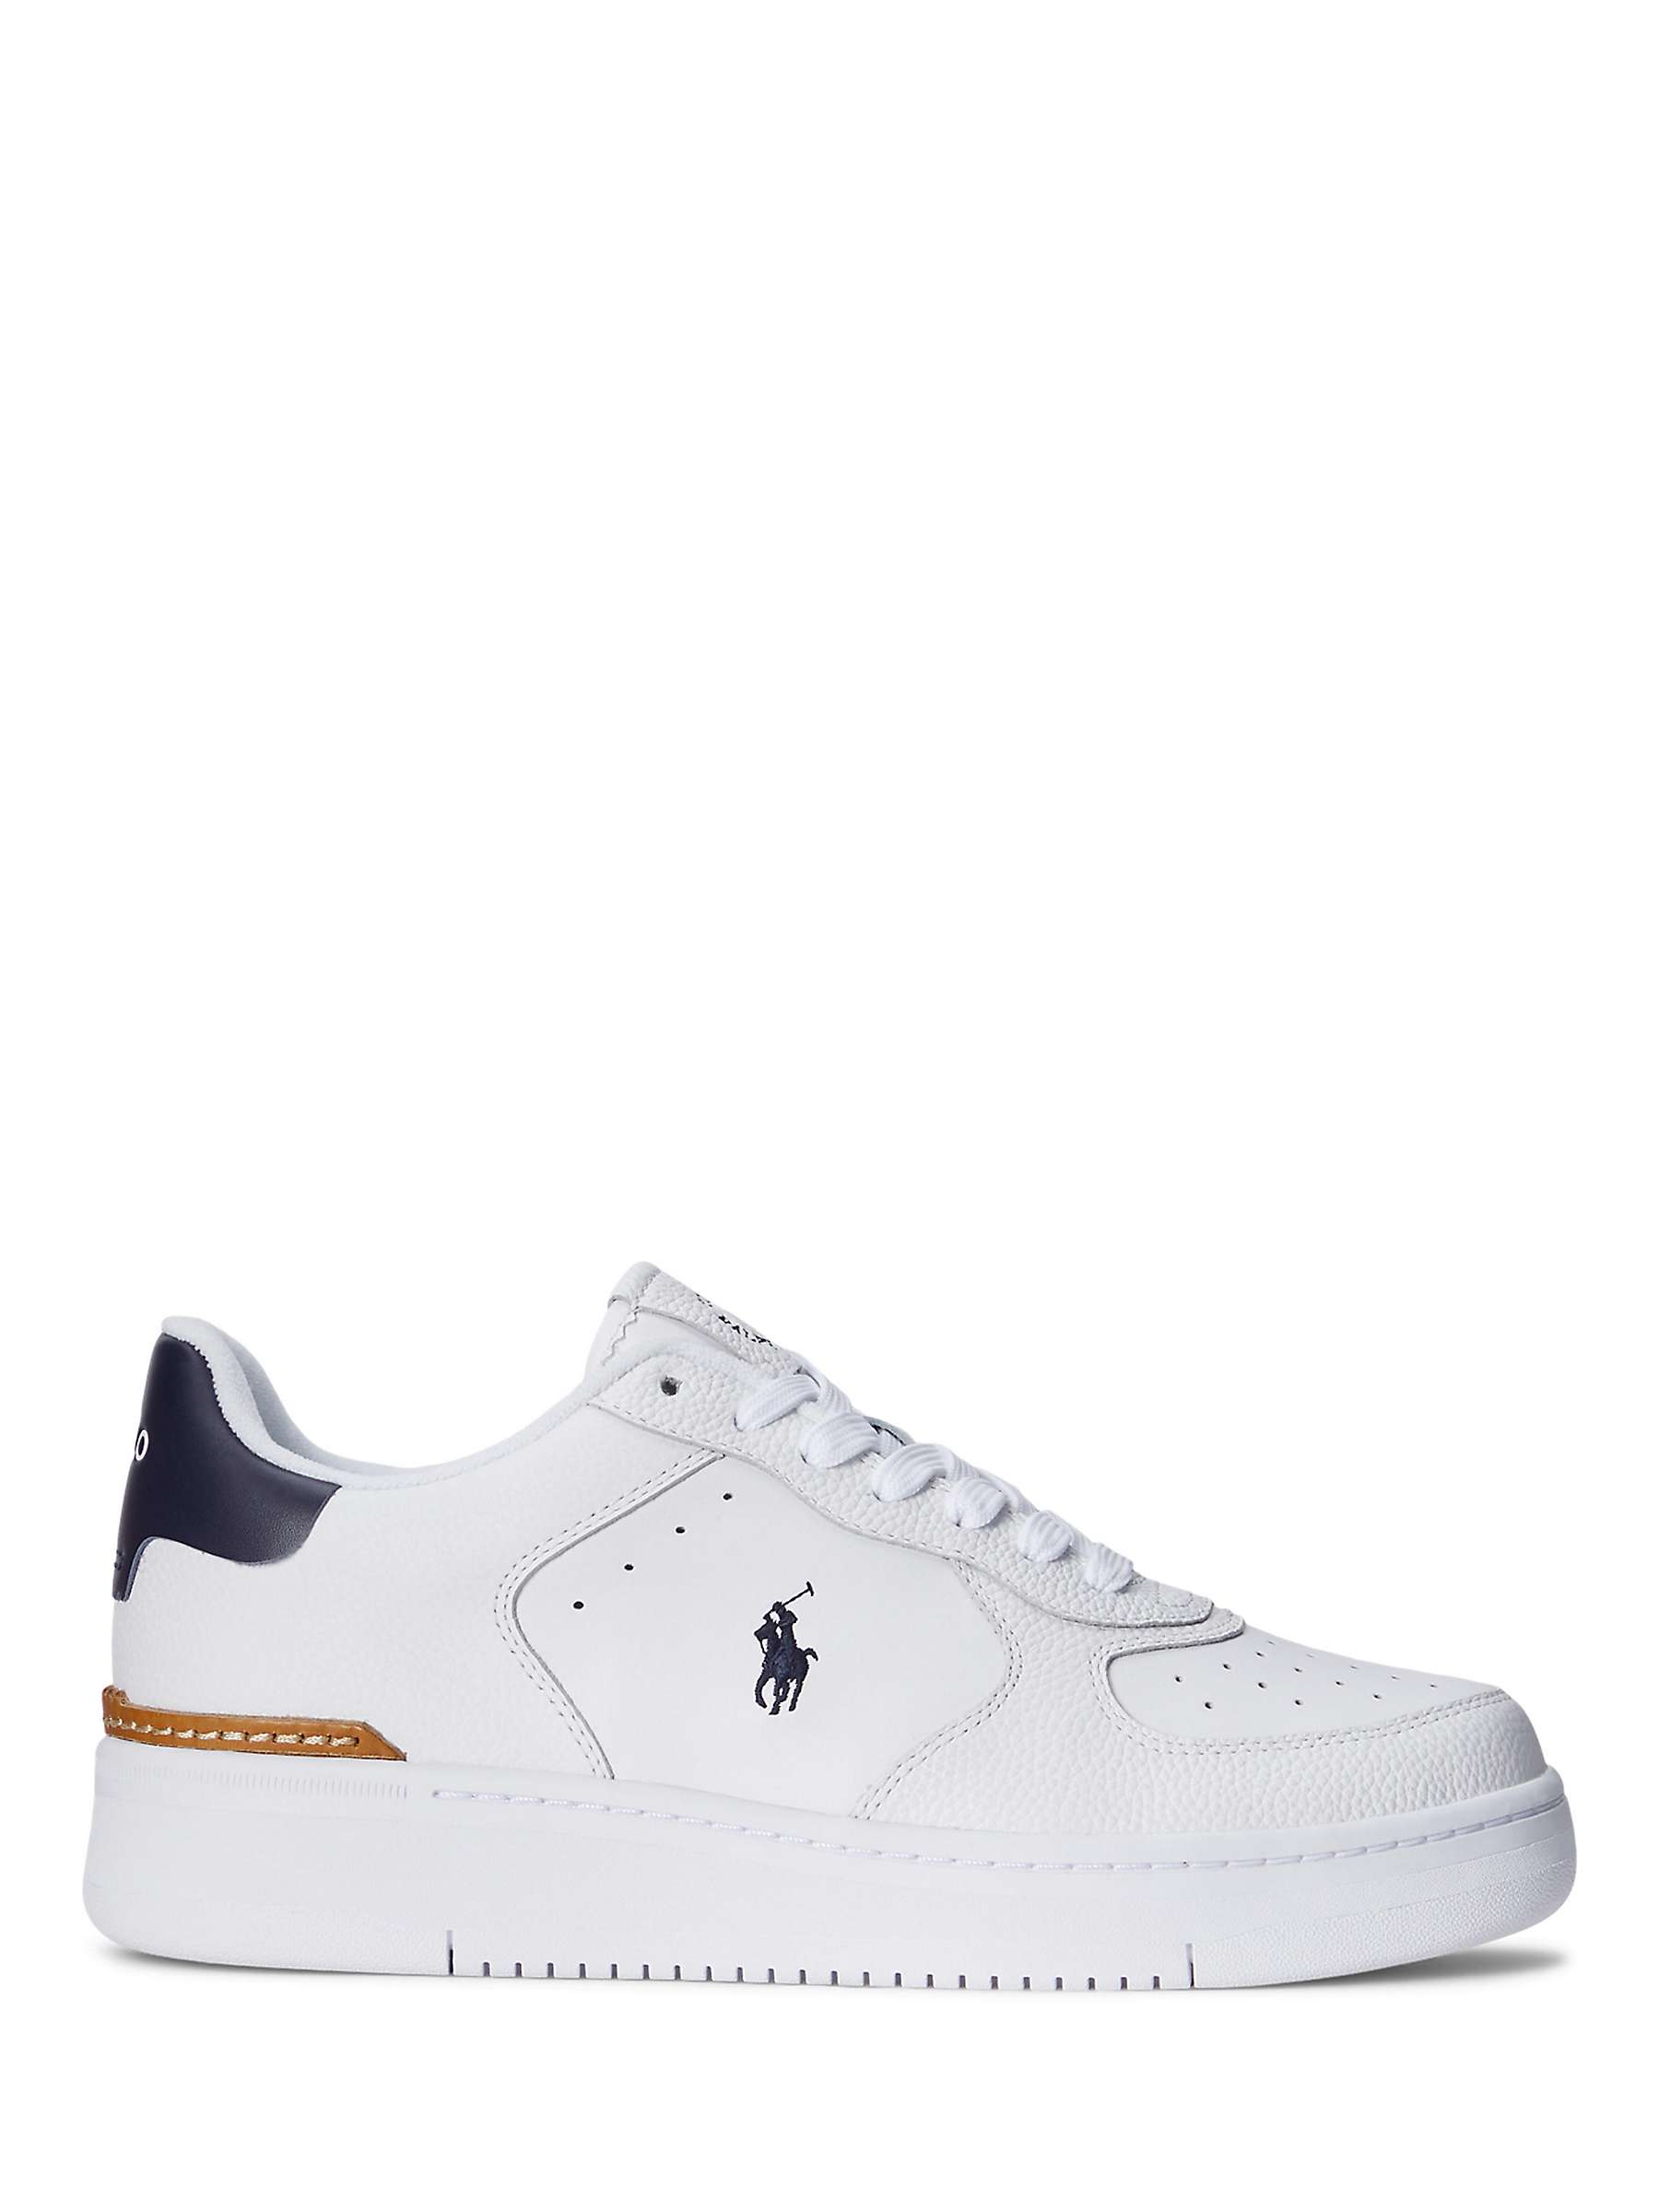 Buy Ralph Lauren Masters Court Leather Trainers, White/Navy Online at johnlewis.com